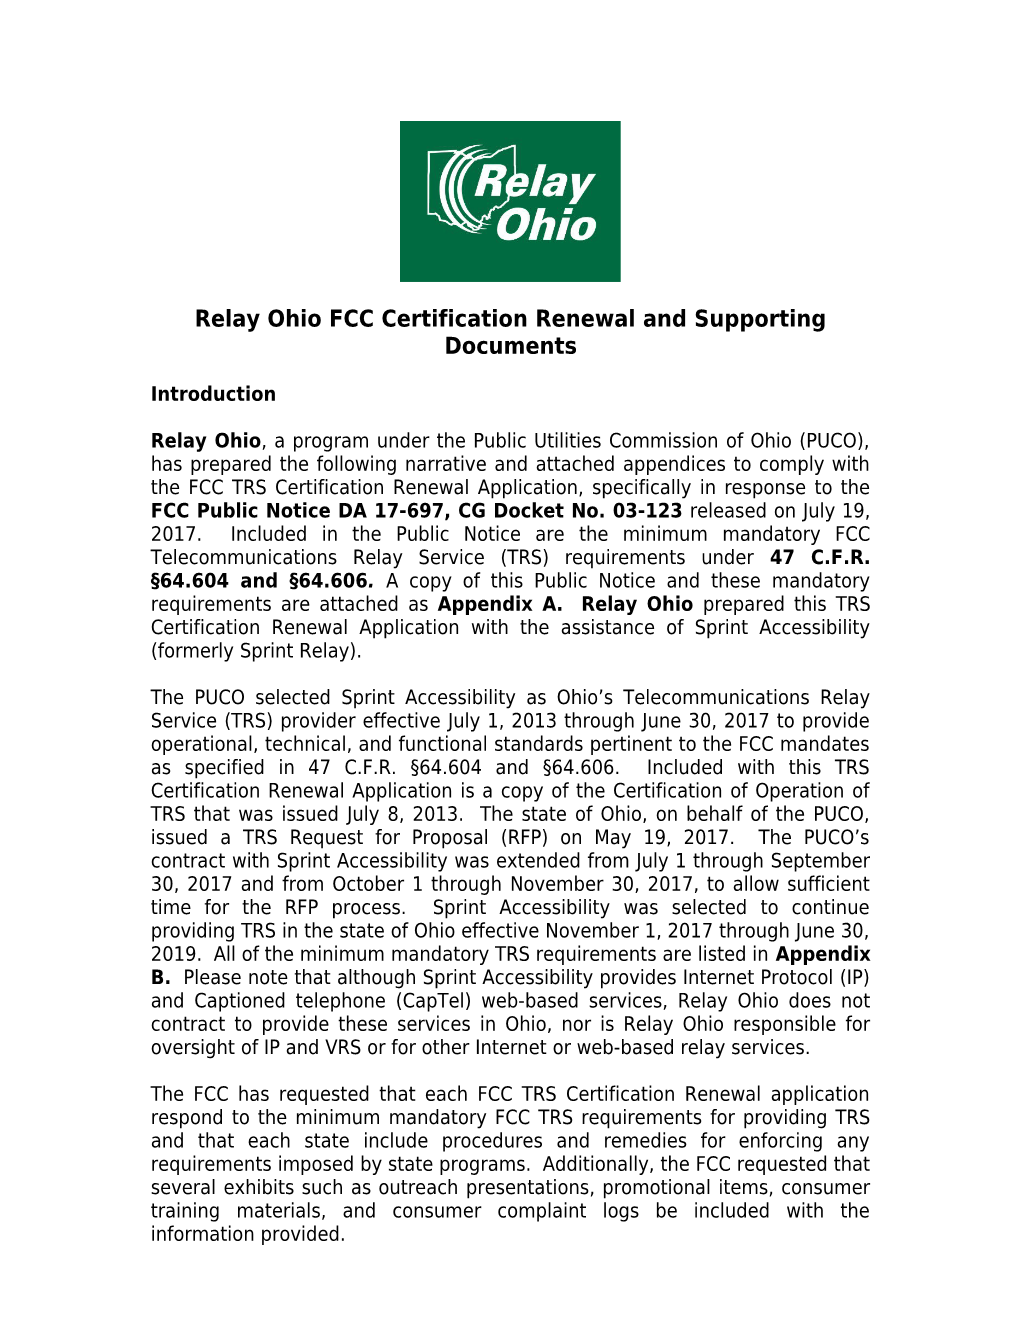 Relay Ohio FCC Certification Renewal and Supporting Documents